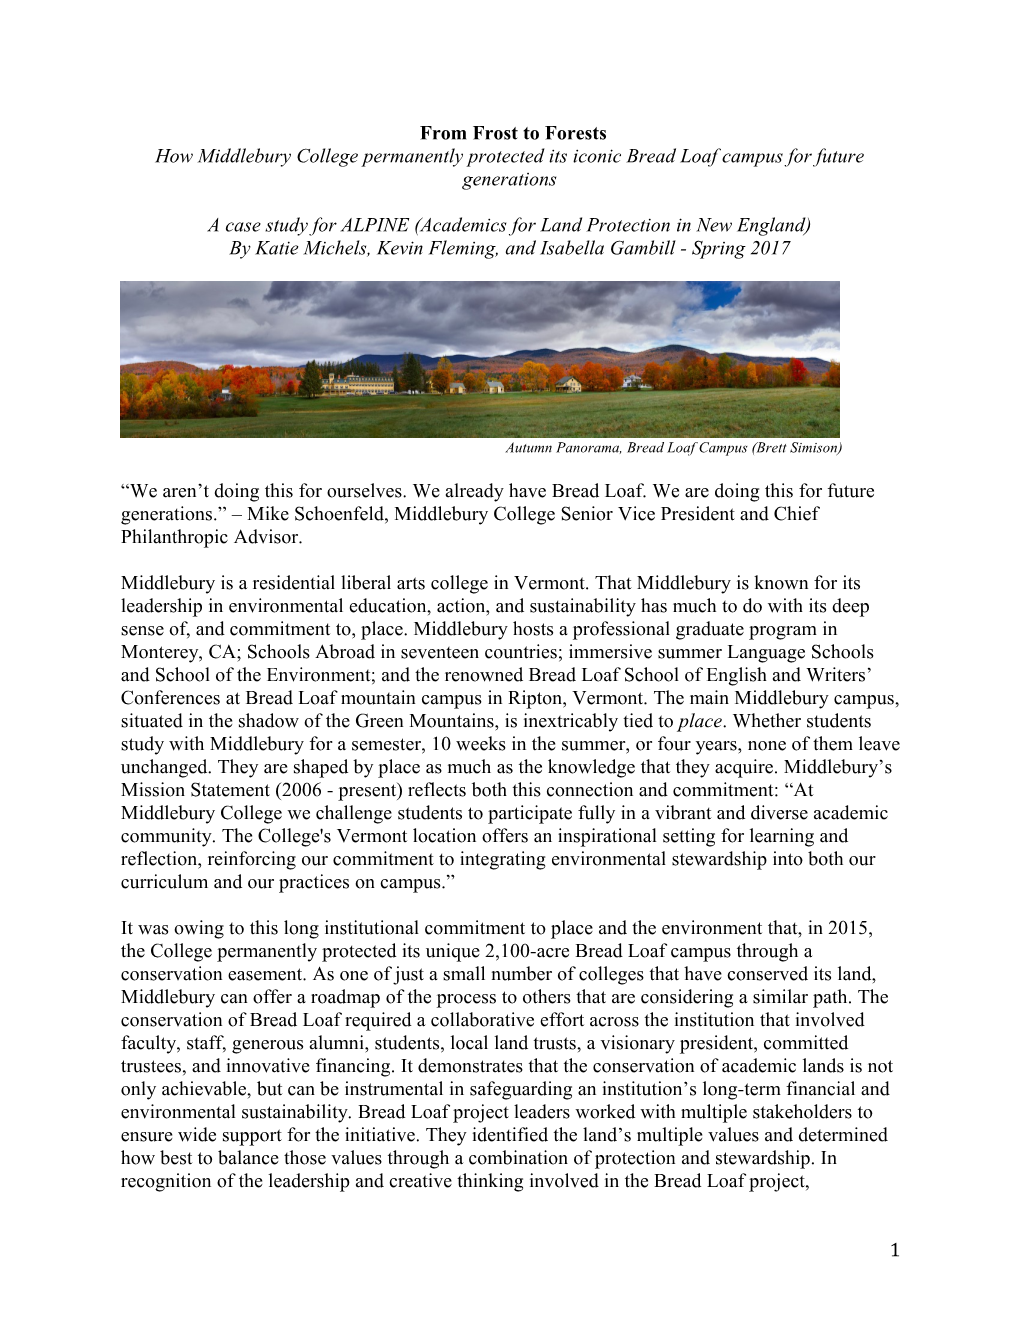 A Case Study for ALPINE (Academics for Land Protection in New England)